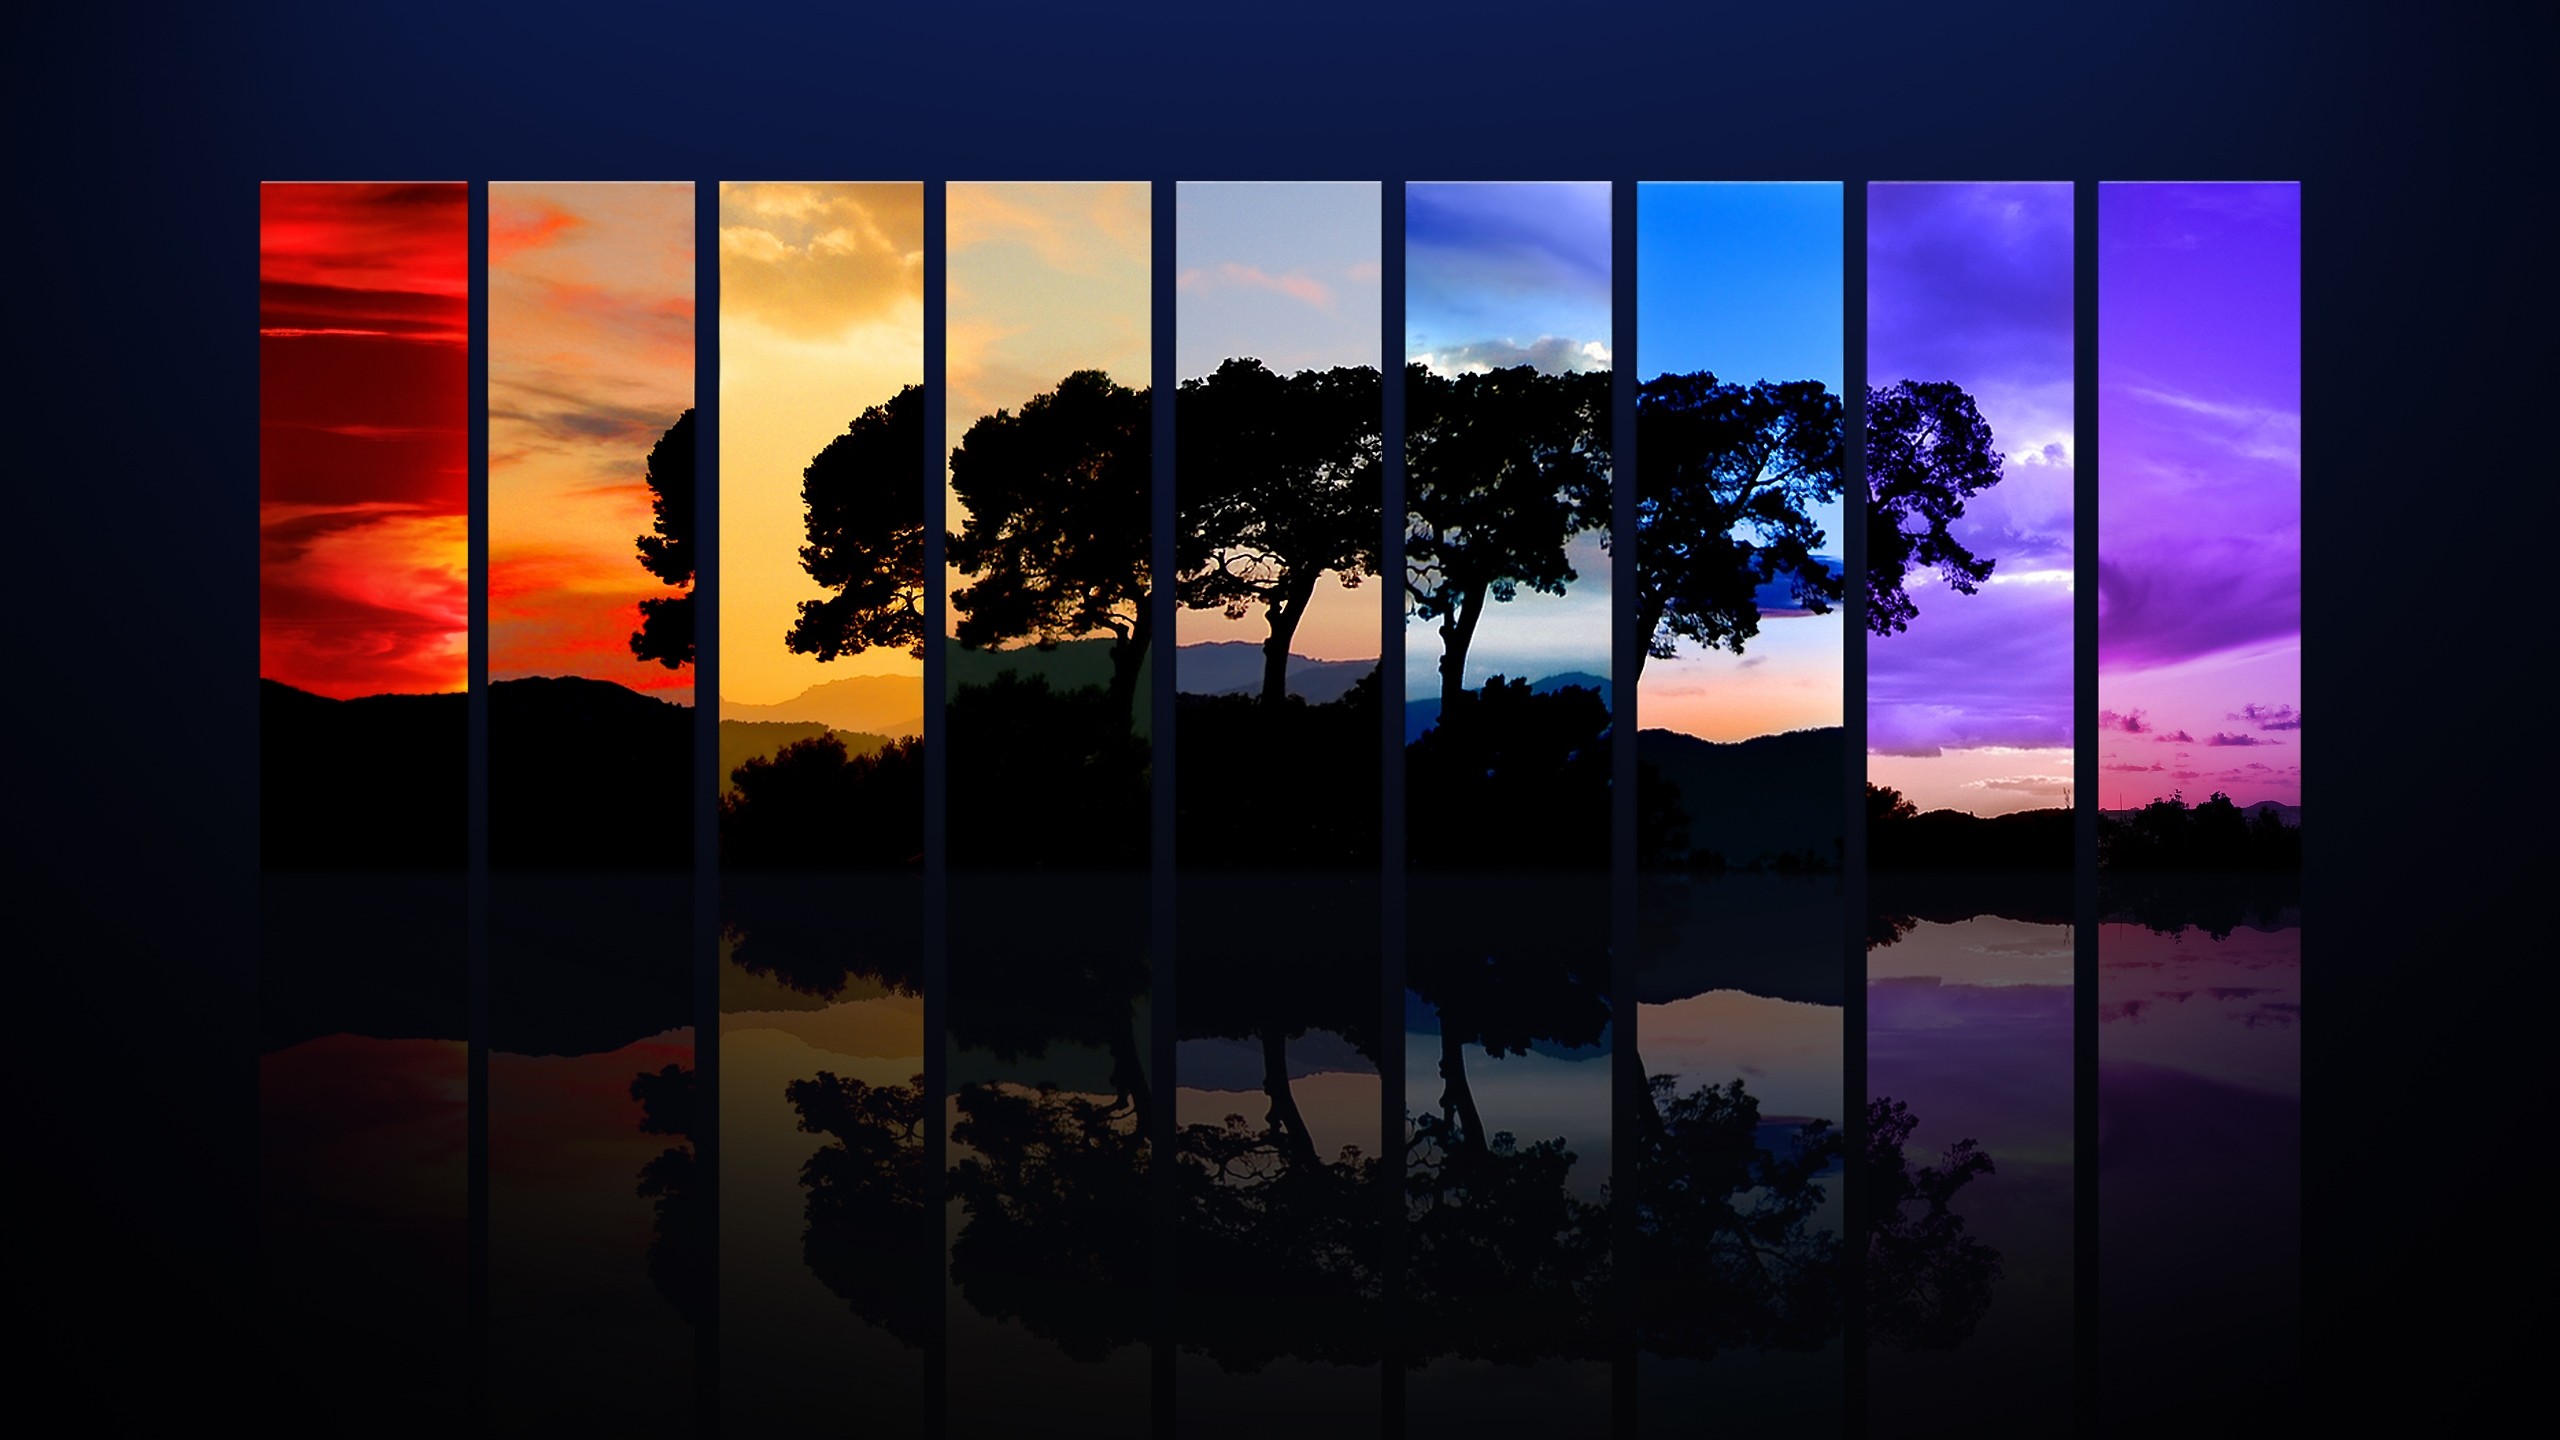 General 2560x1440 abstract collage trees sky nature reflection digital art colorful panels